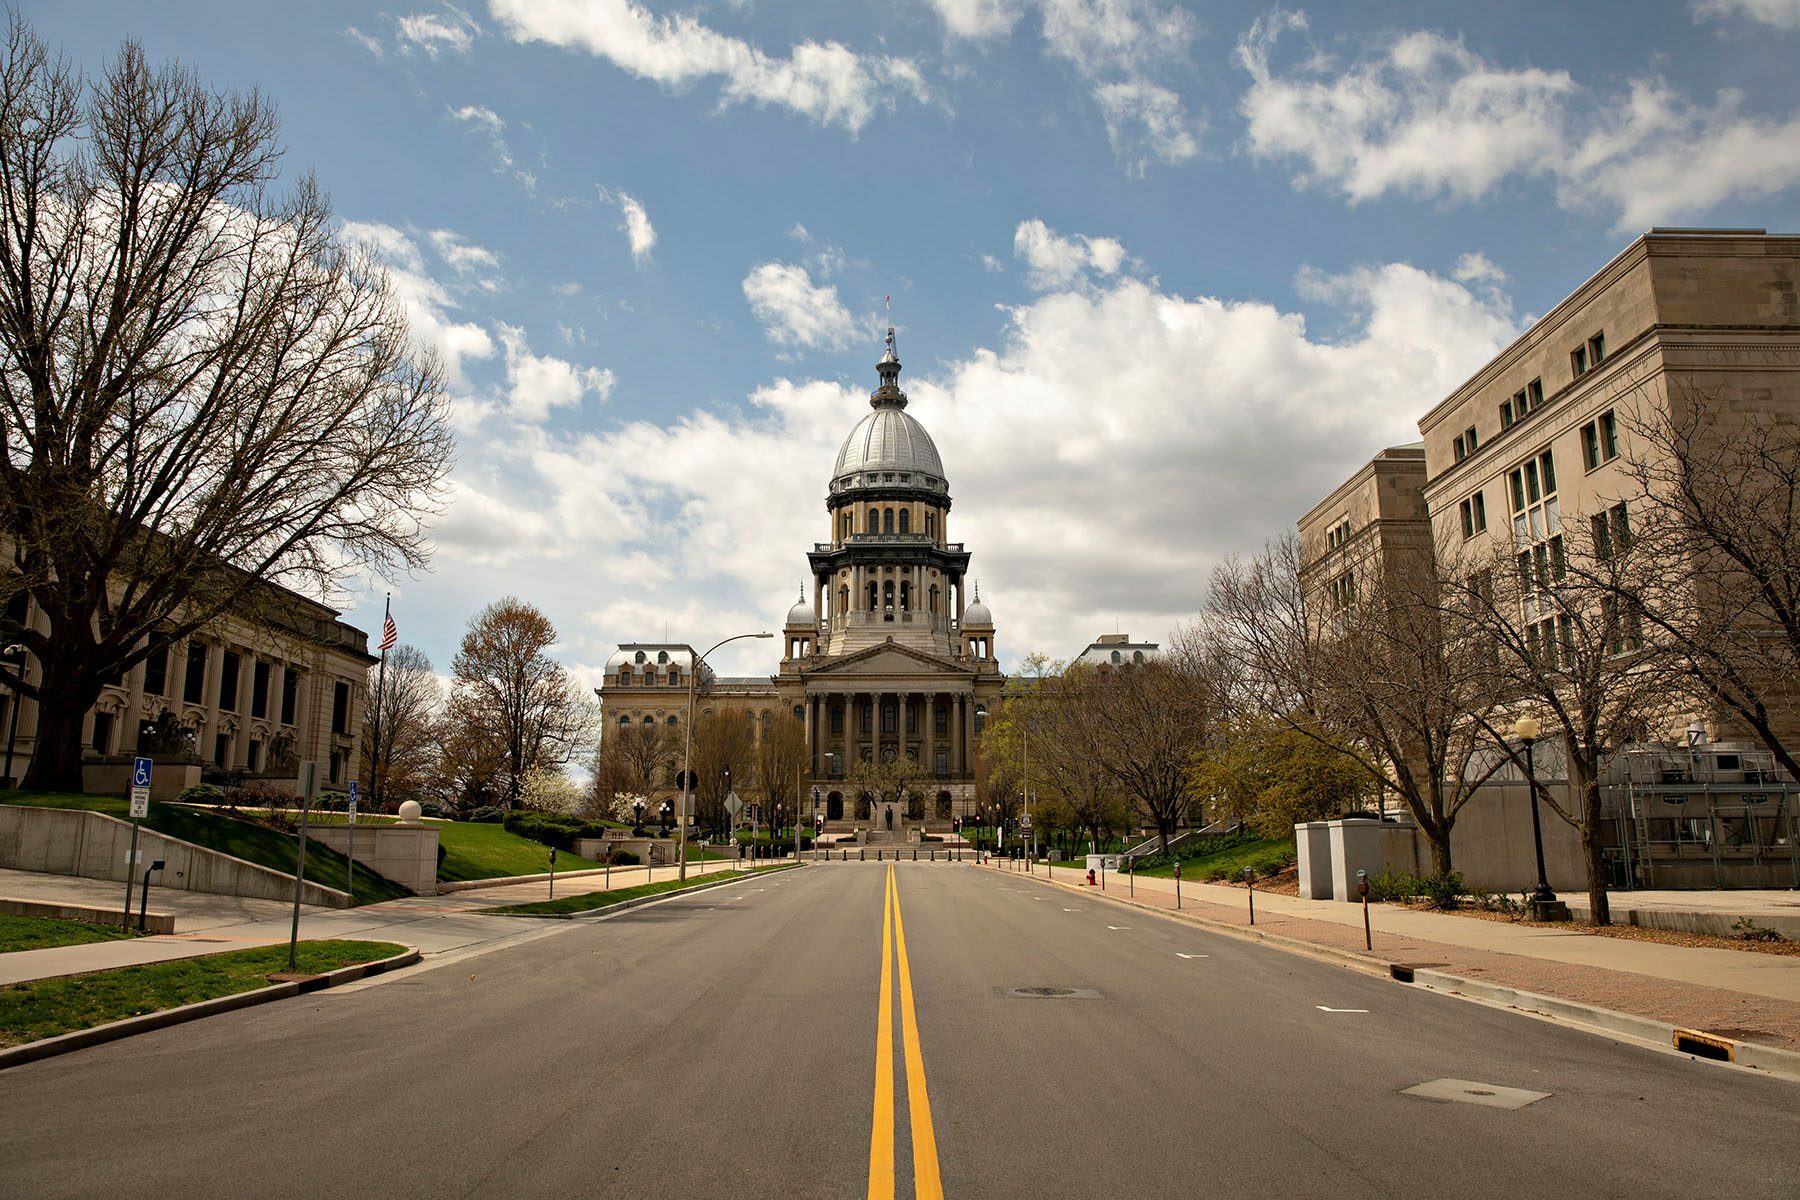 The Illinois State Capitol building in Springfield